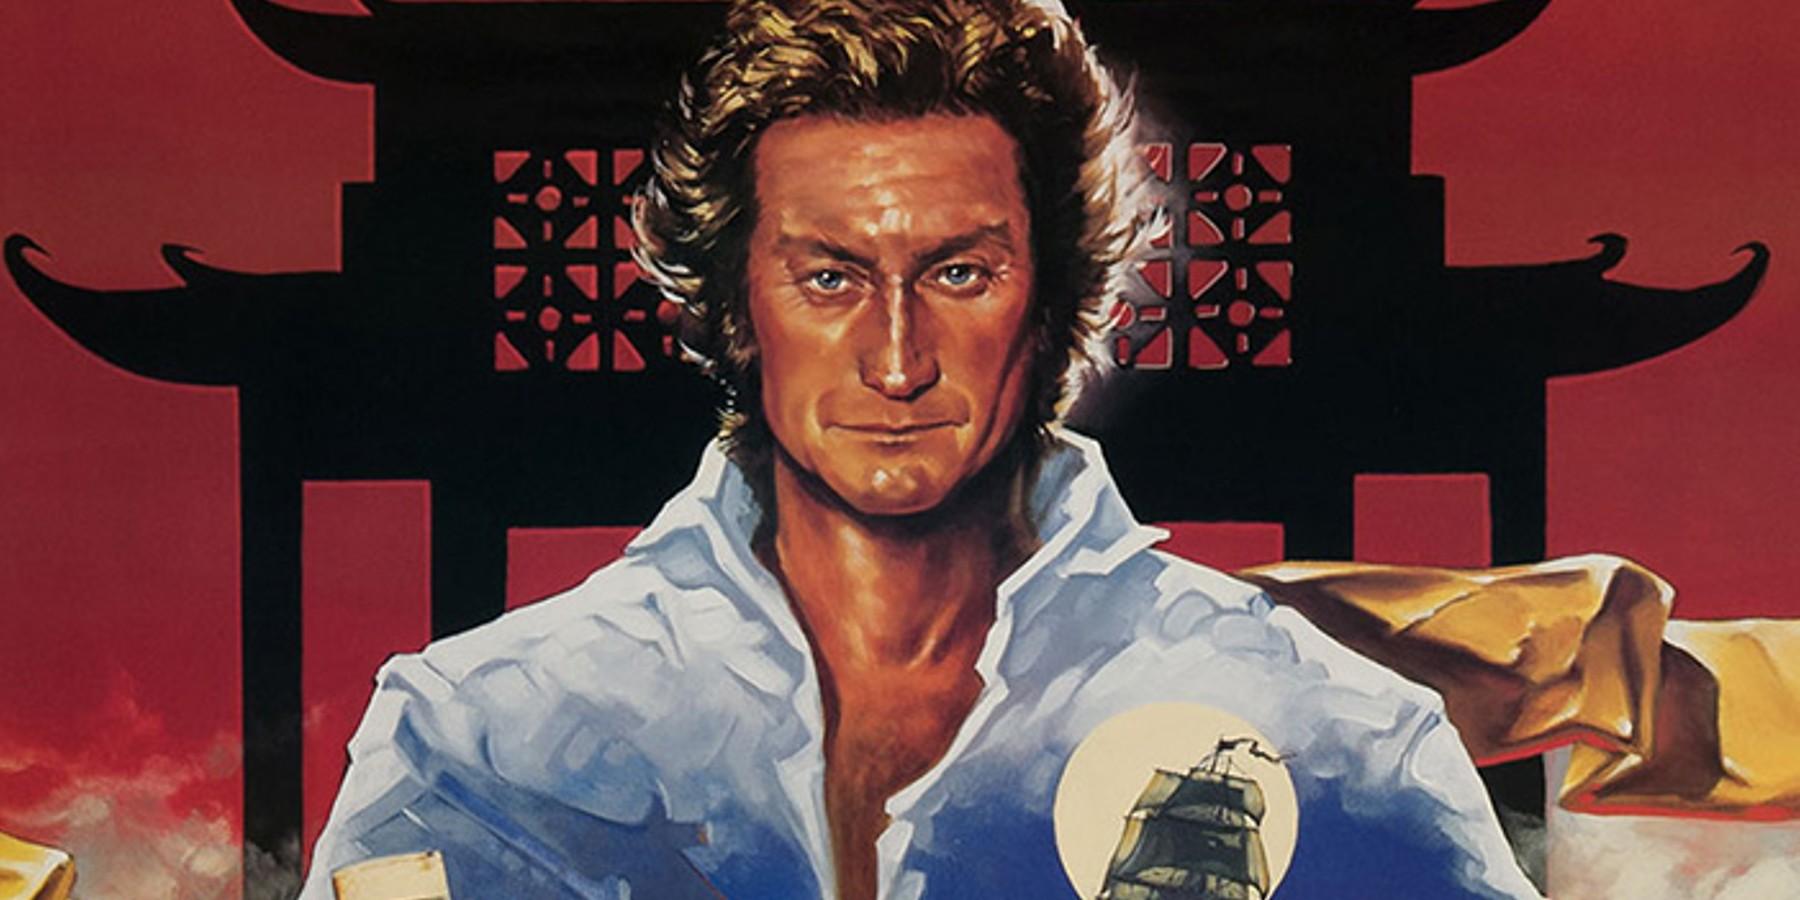 An illustration of Bryan Brown on the Ta-Pan movie poster.